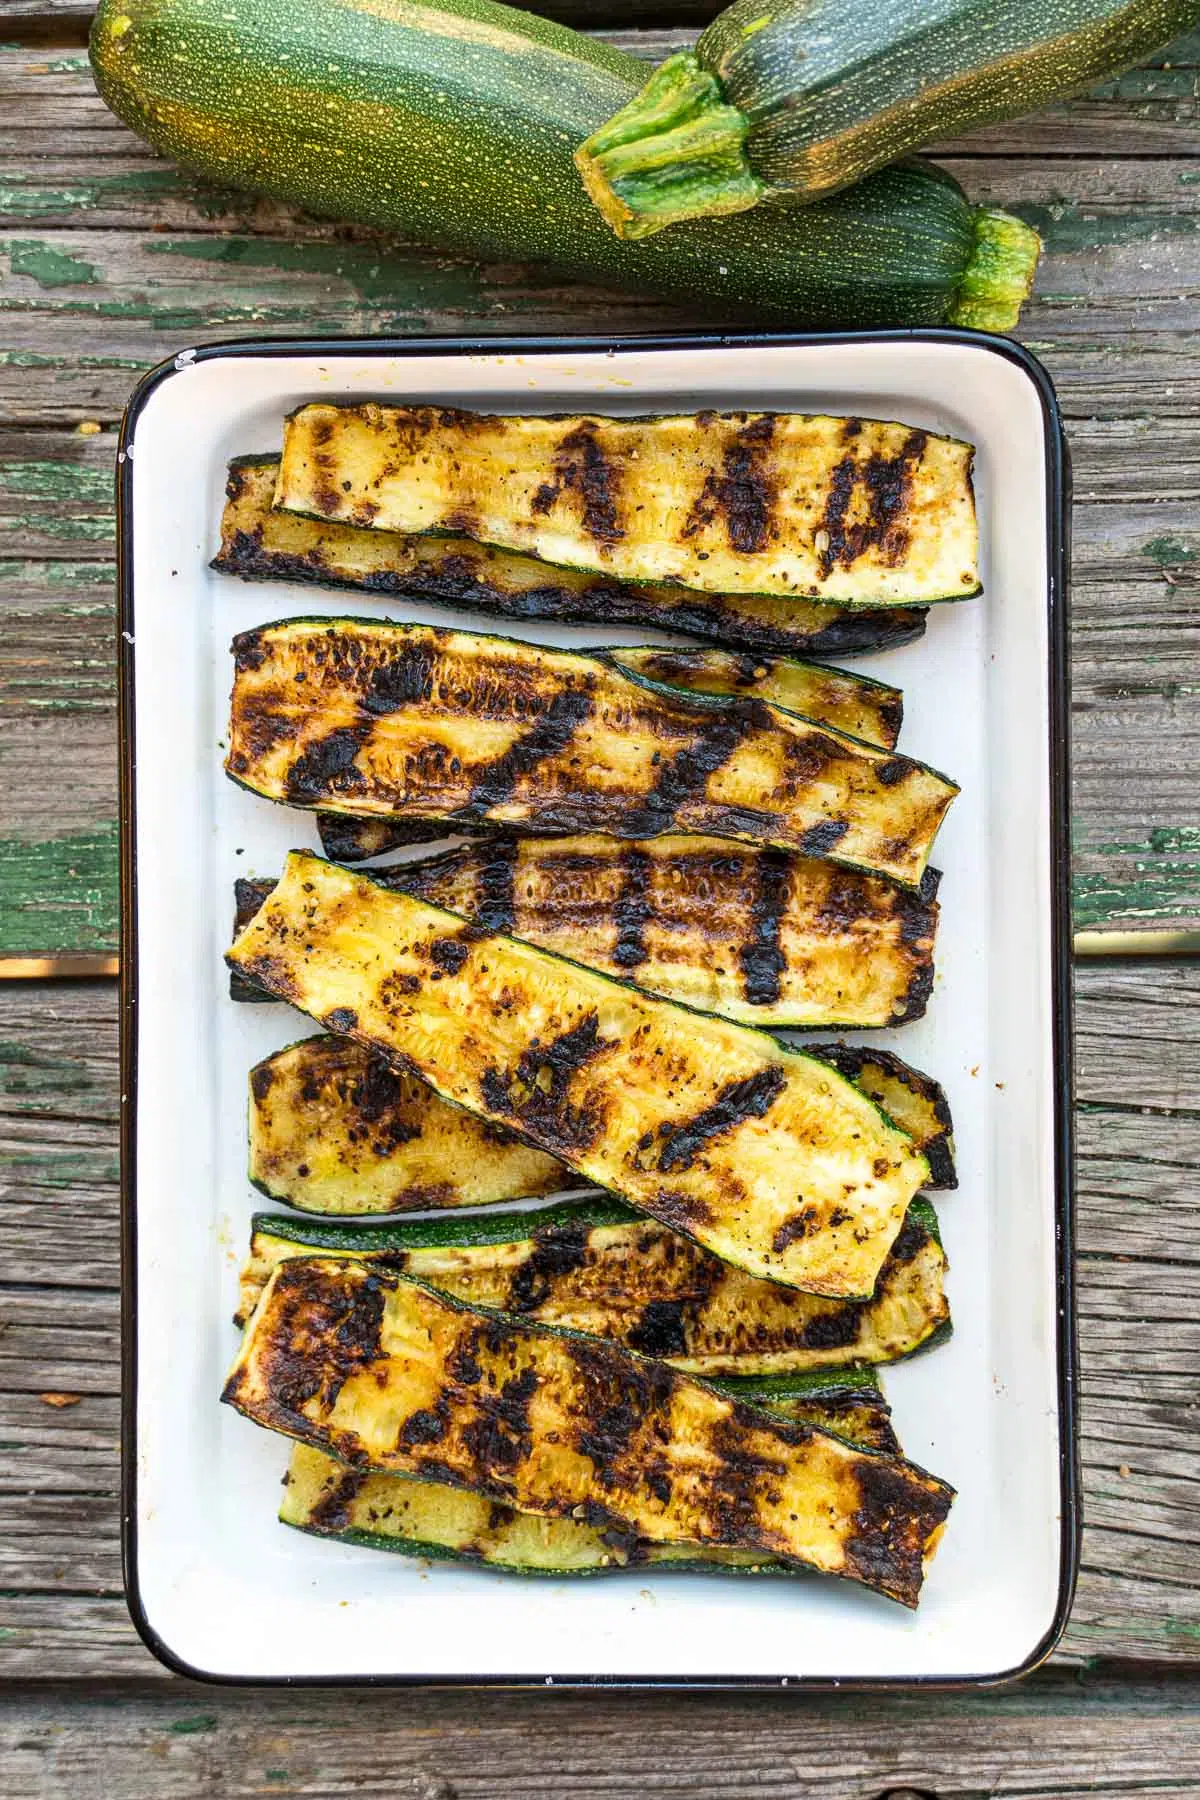 Grilled zucchini in a white enamel dish with fresh zucchinis in frame